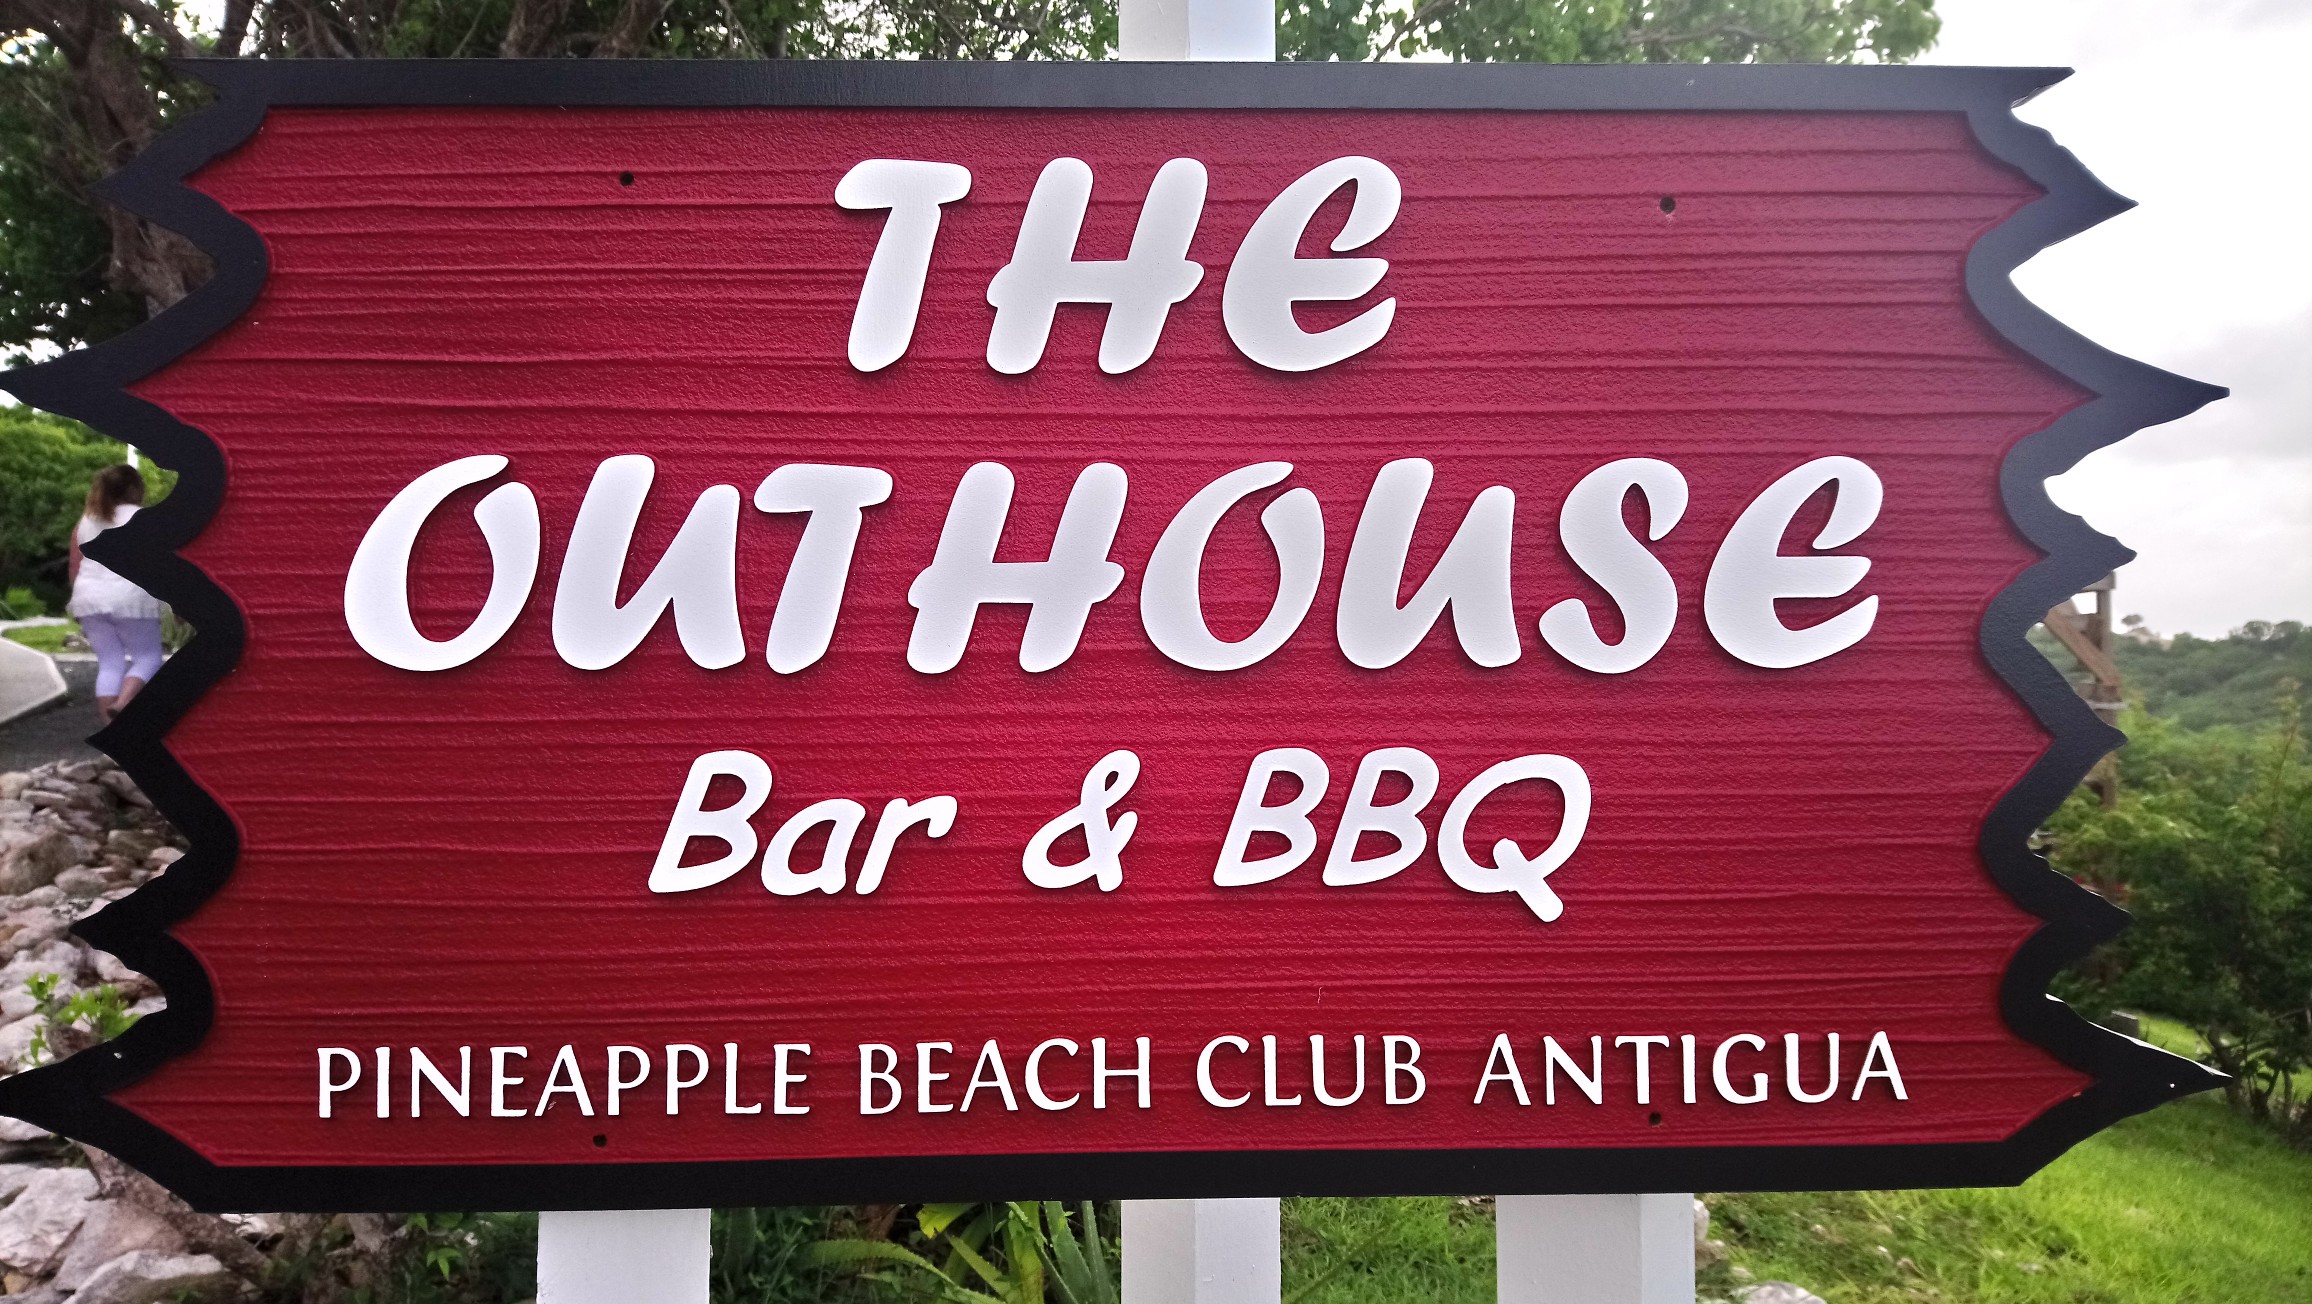 The Outhouse Restaurant at Pineapple Beach Club Antigua